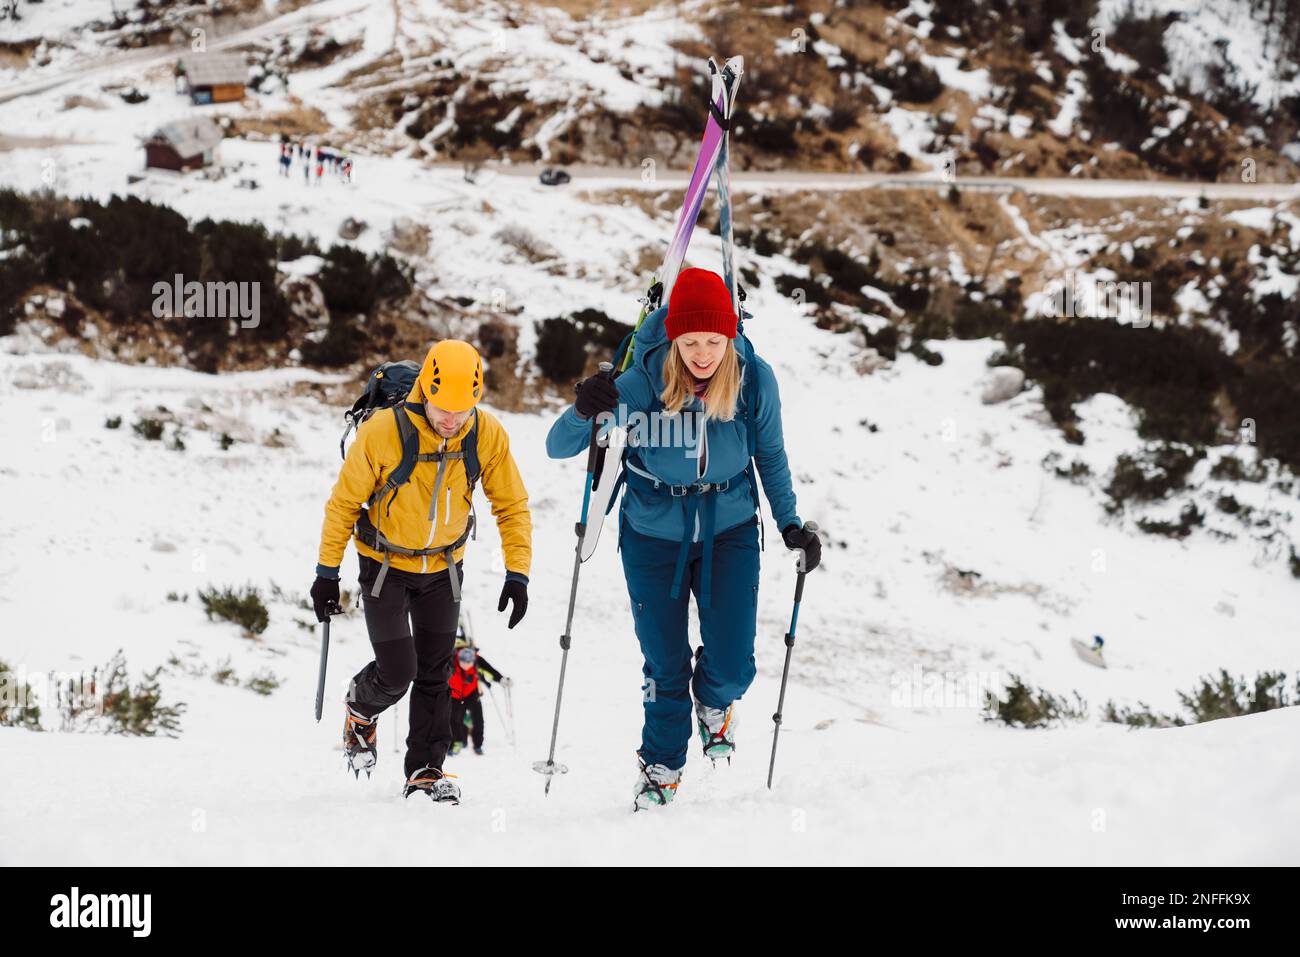 Couple of mountaineers climbing up a snowy mountain, woman carrying skis on her back  Stock Photo